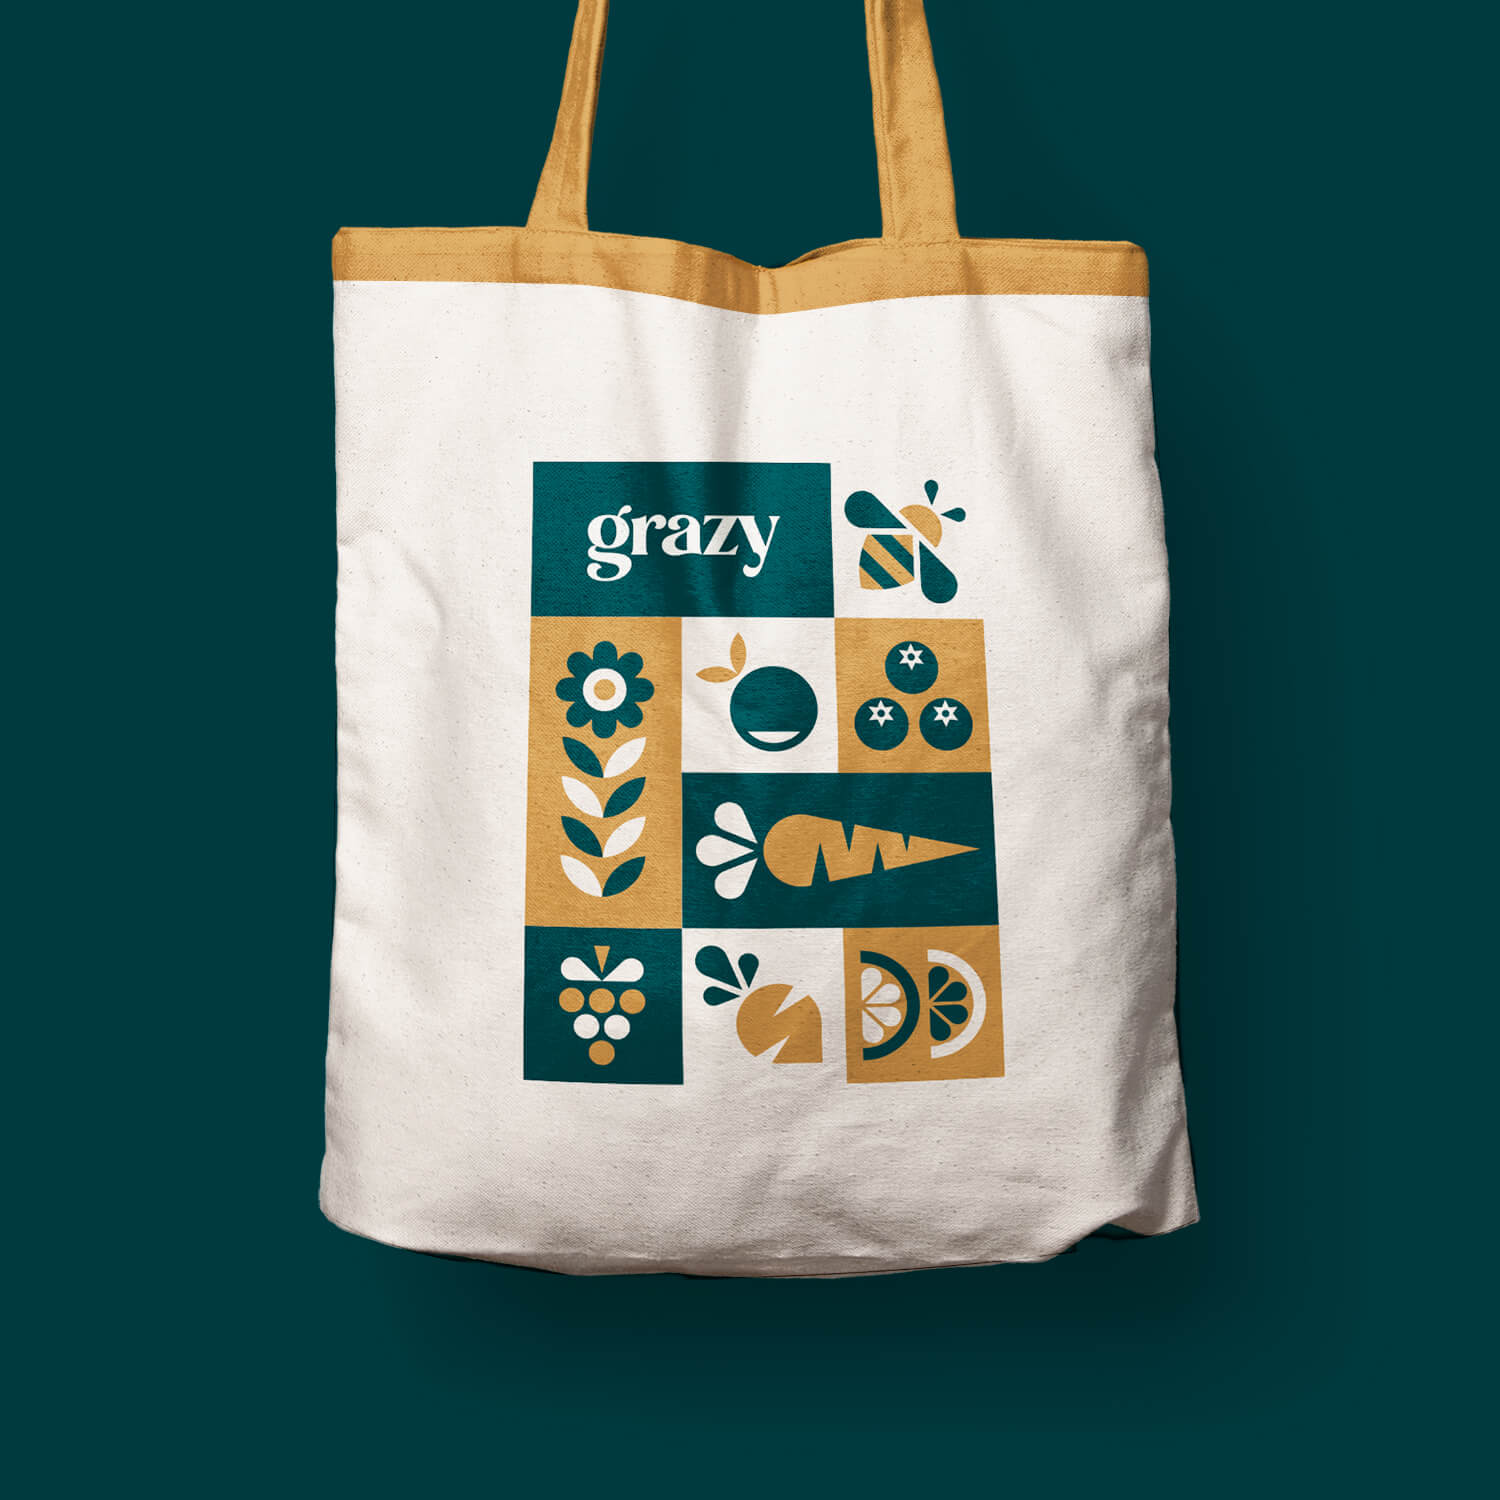 Tote bag featuring a tiled illustration and Grazy wordmark on the side